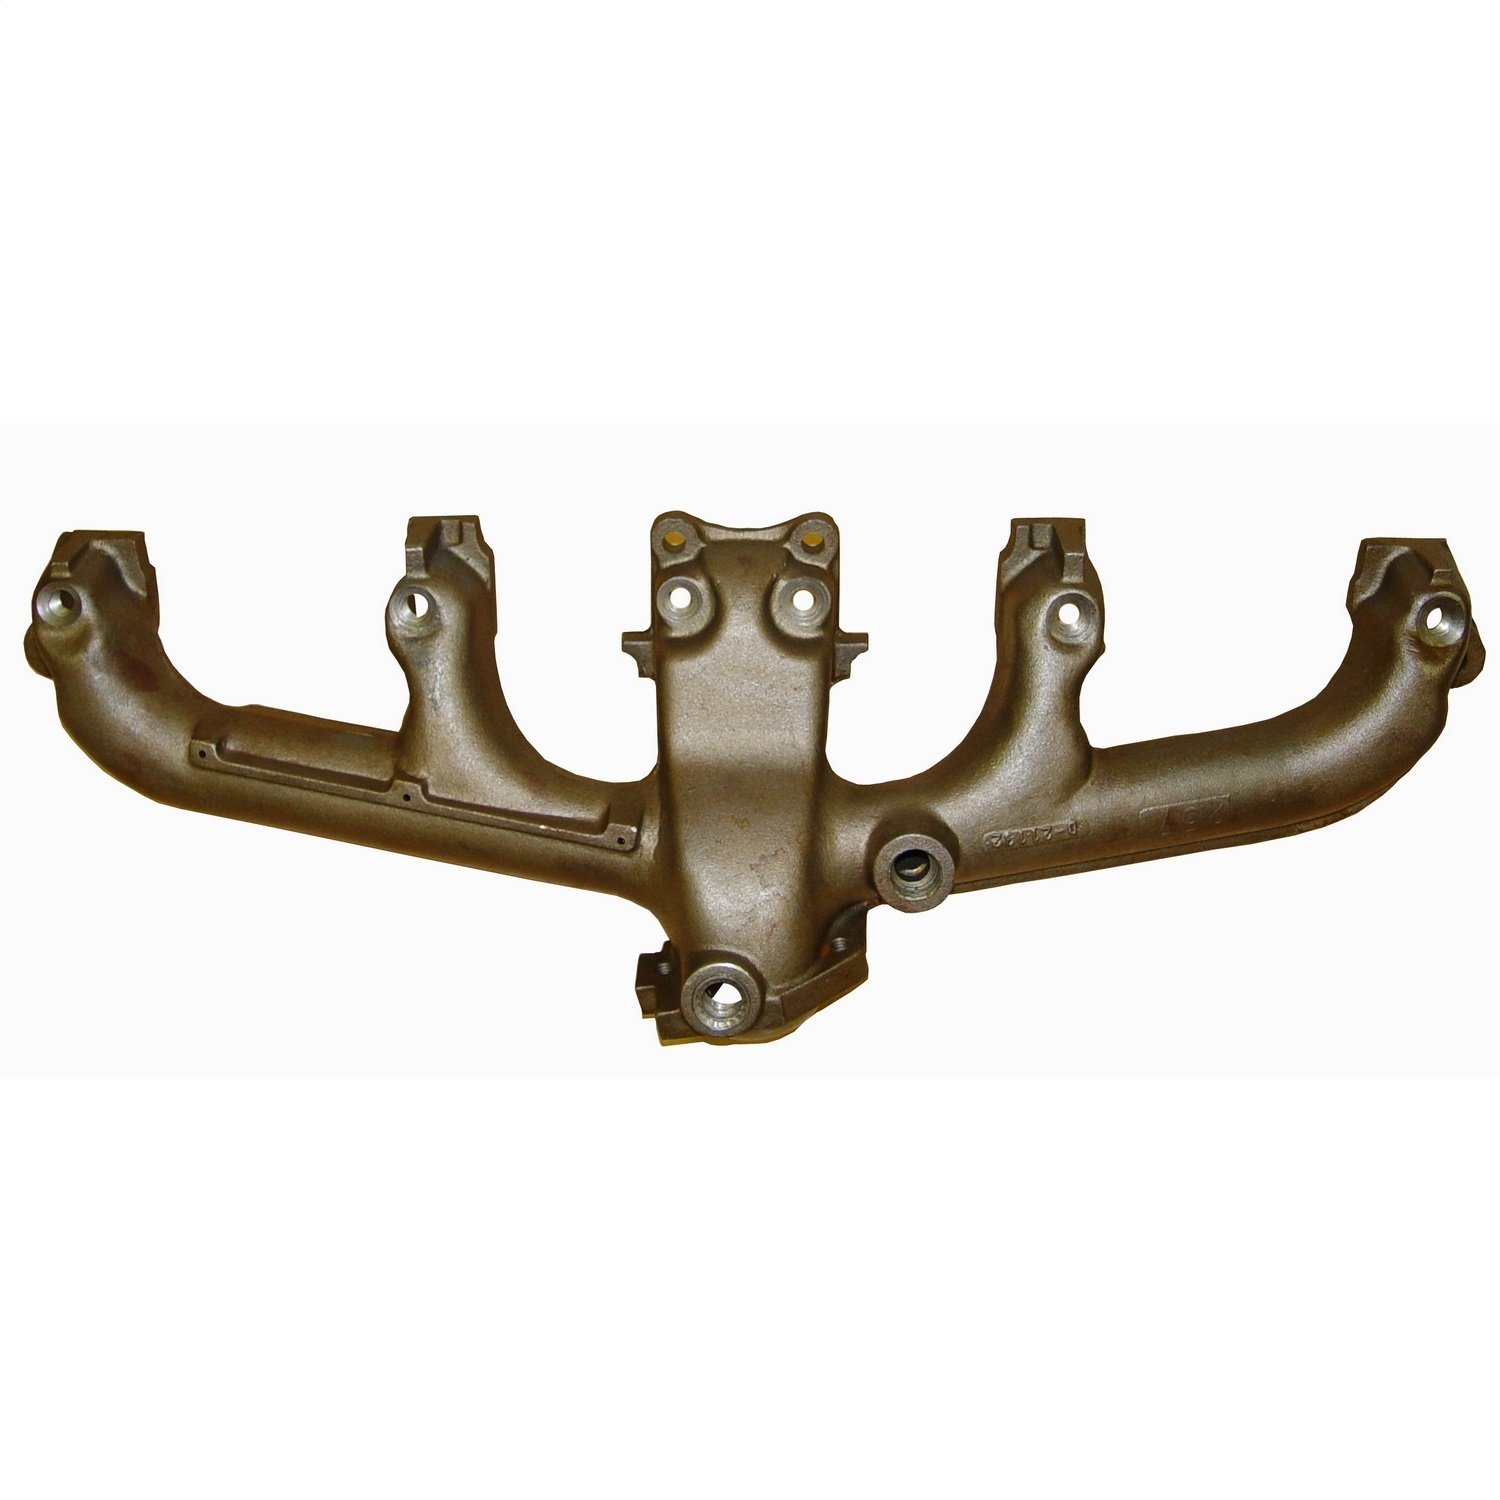 Replacement exhaust manifold from Omix-ADA, Fits 81-90 Jeep models with a 4.2 liter engine.